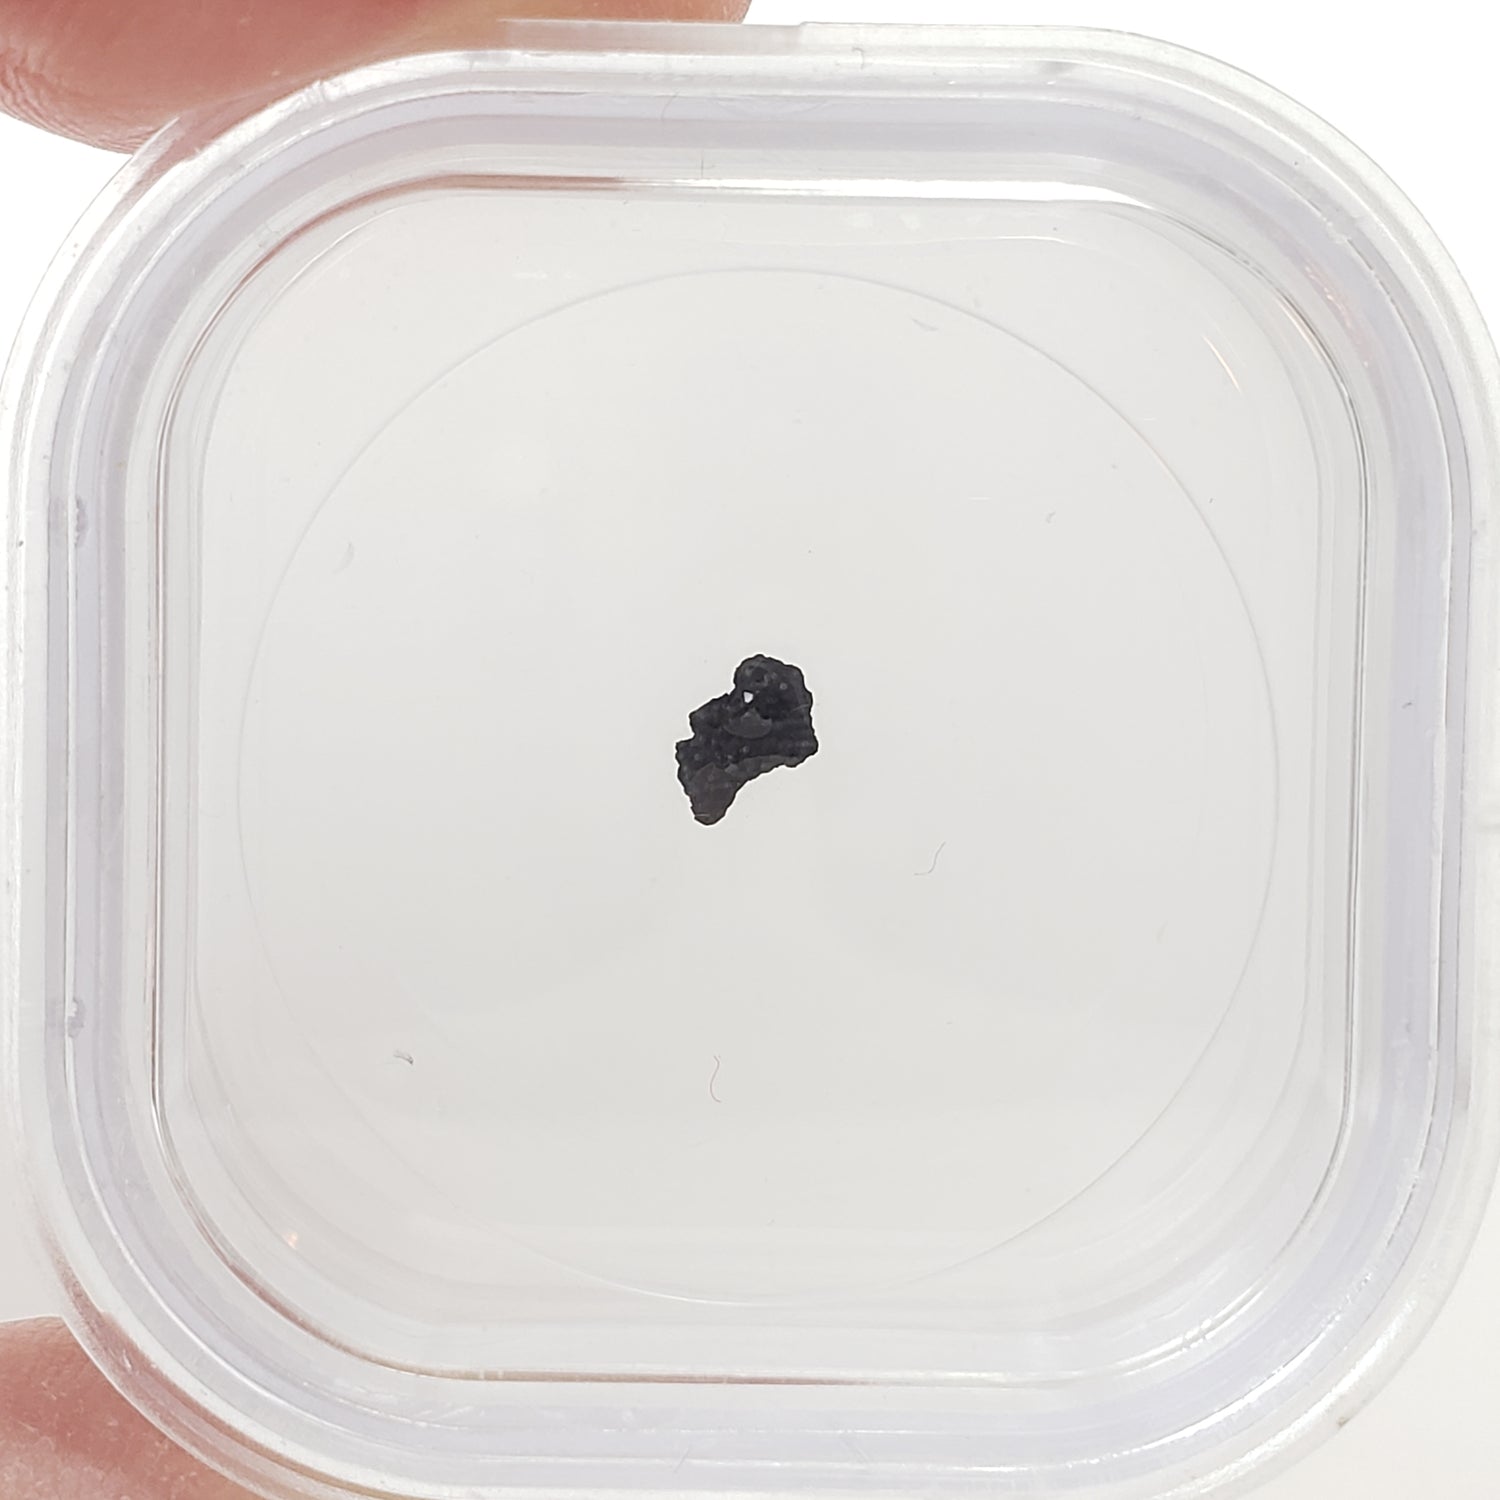 Tagish Lake Meteorite | 20 mg | Fragment | C2-ung Class | Observed Fall 2000 Canada